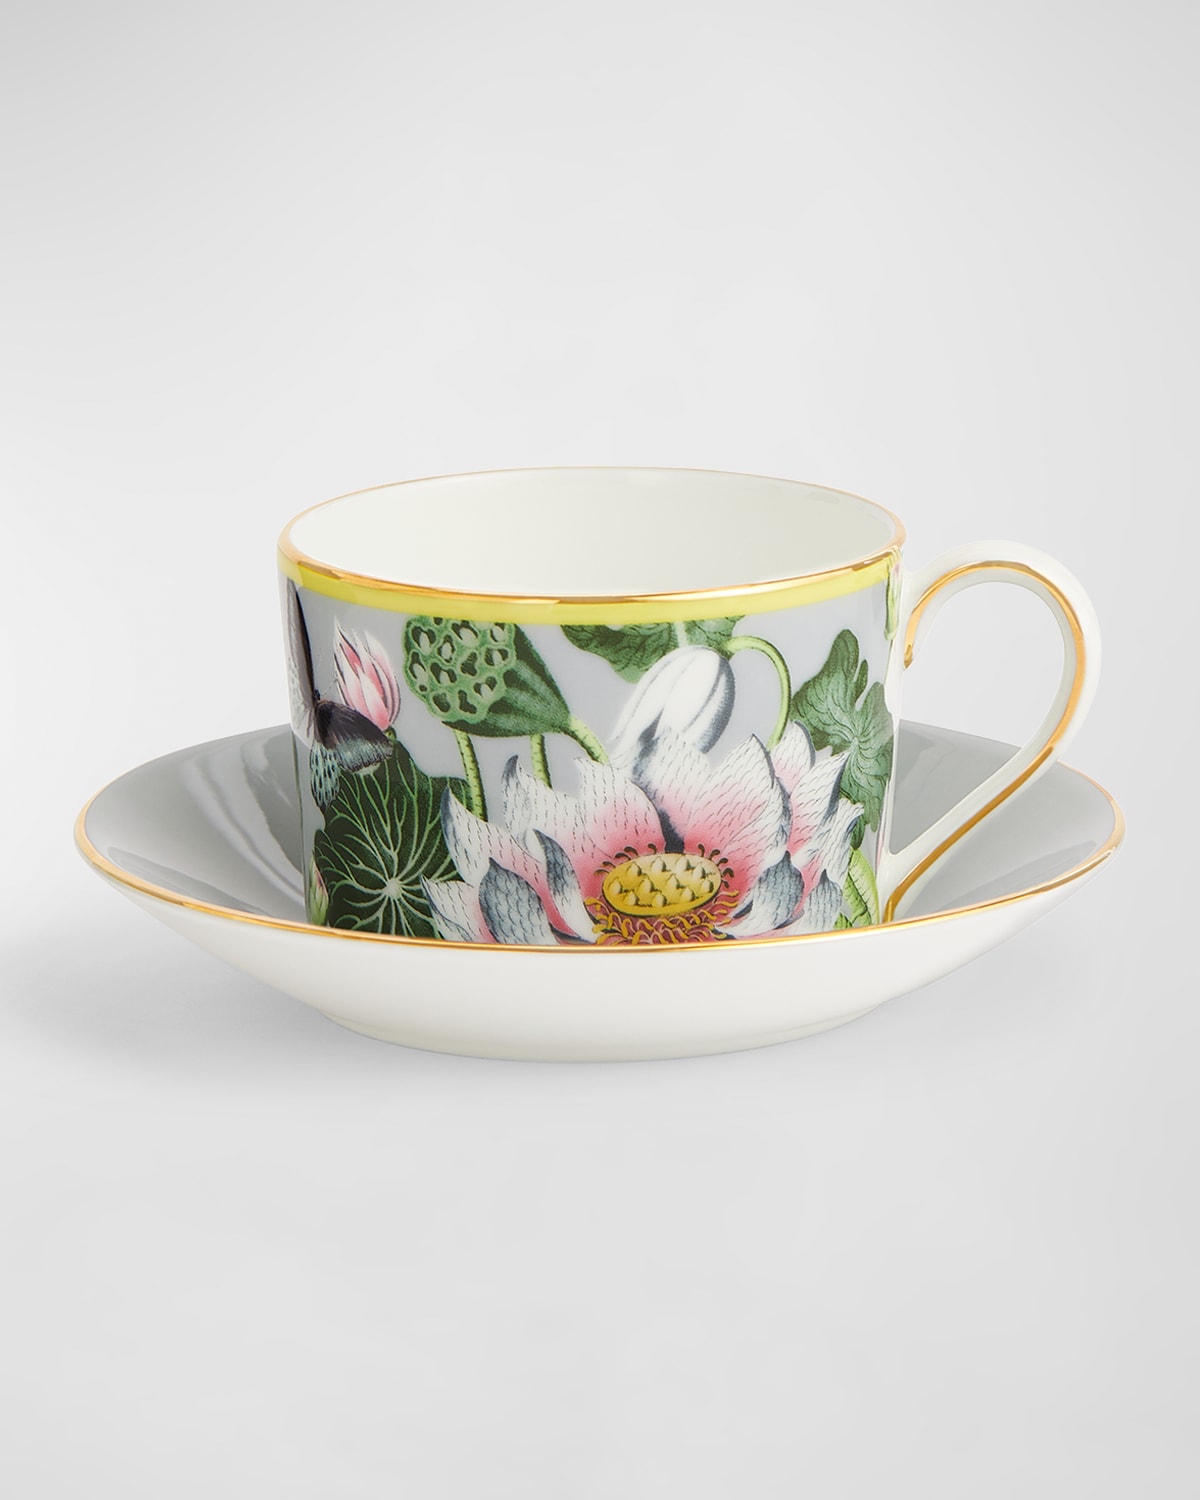 WEDGWOOD WATERLILY TEACUP AND SAUCER SET